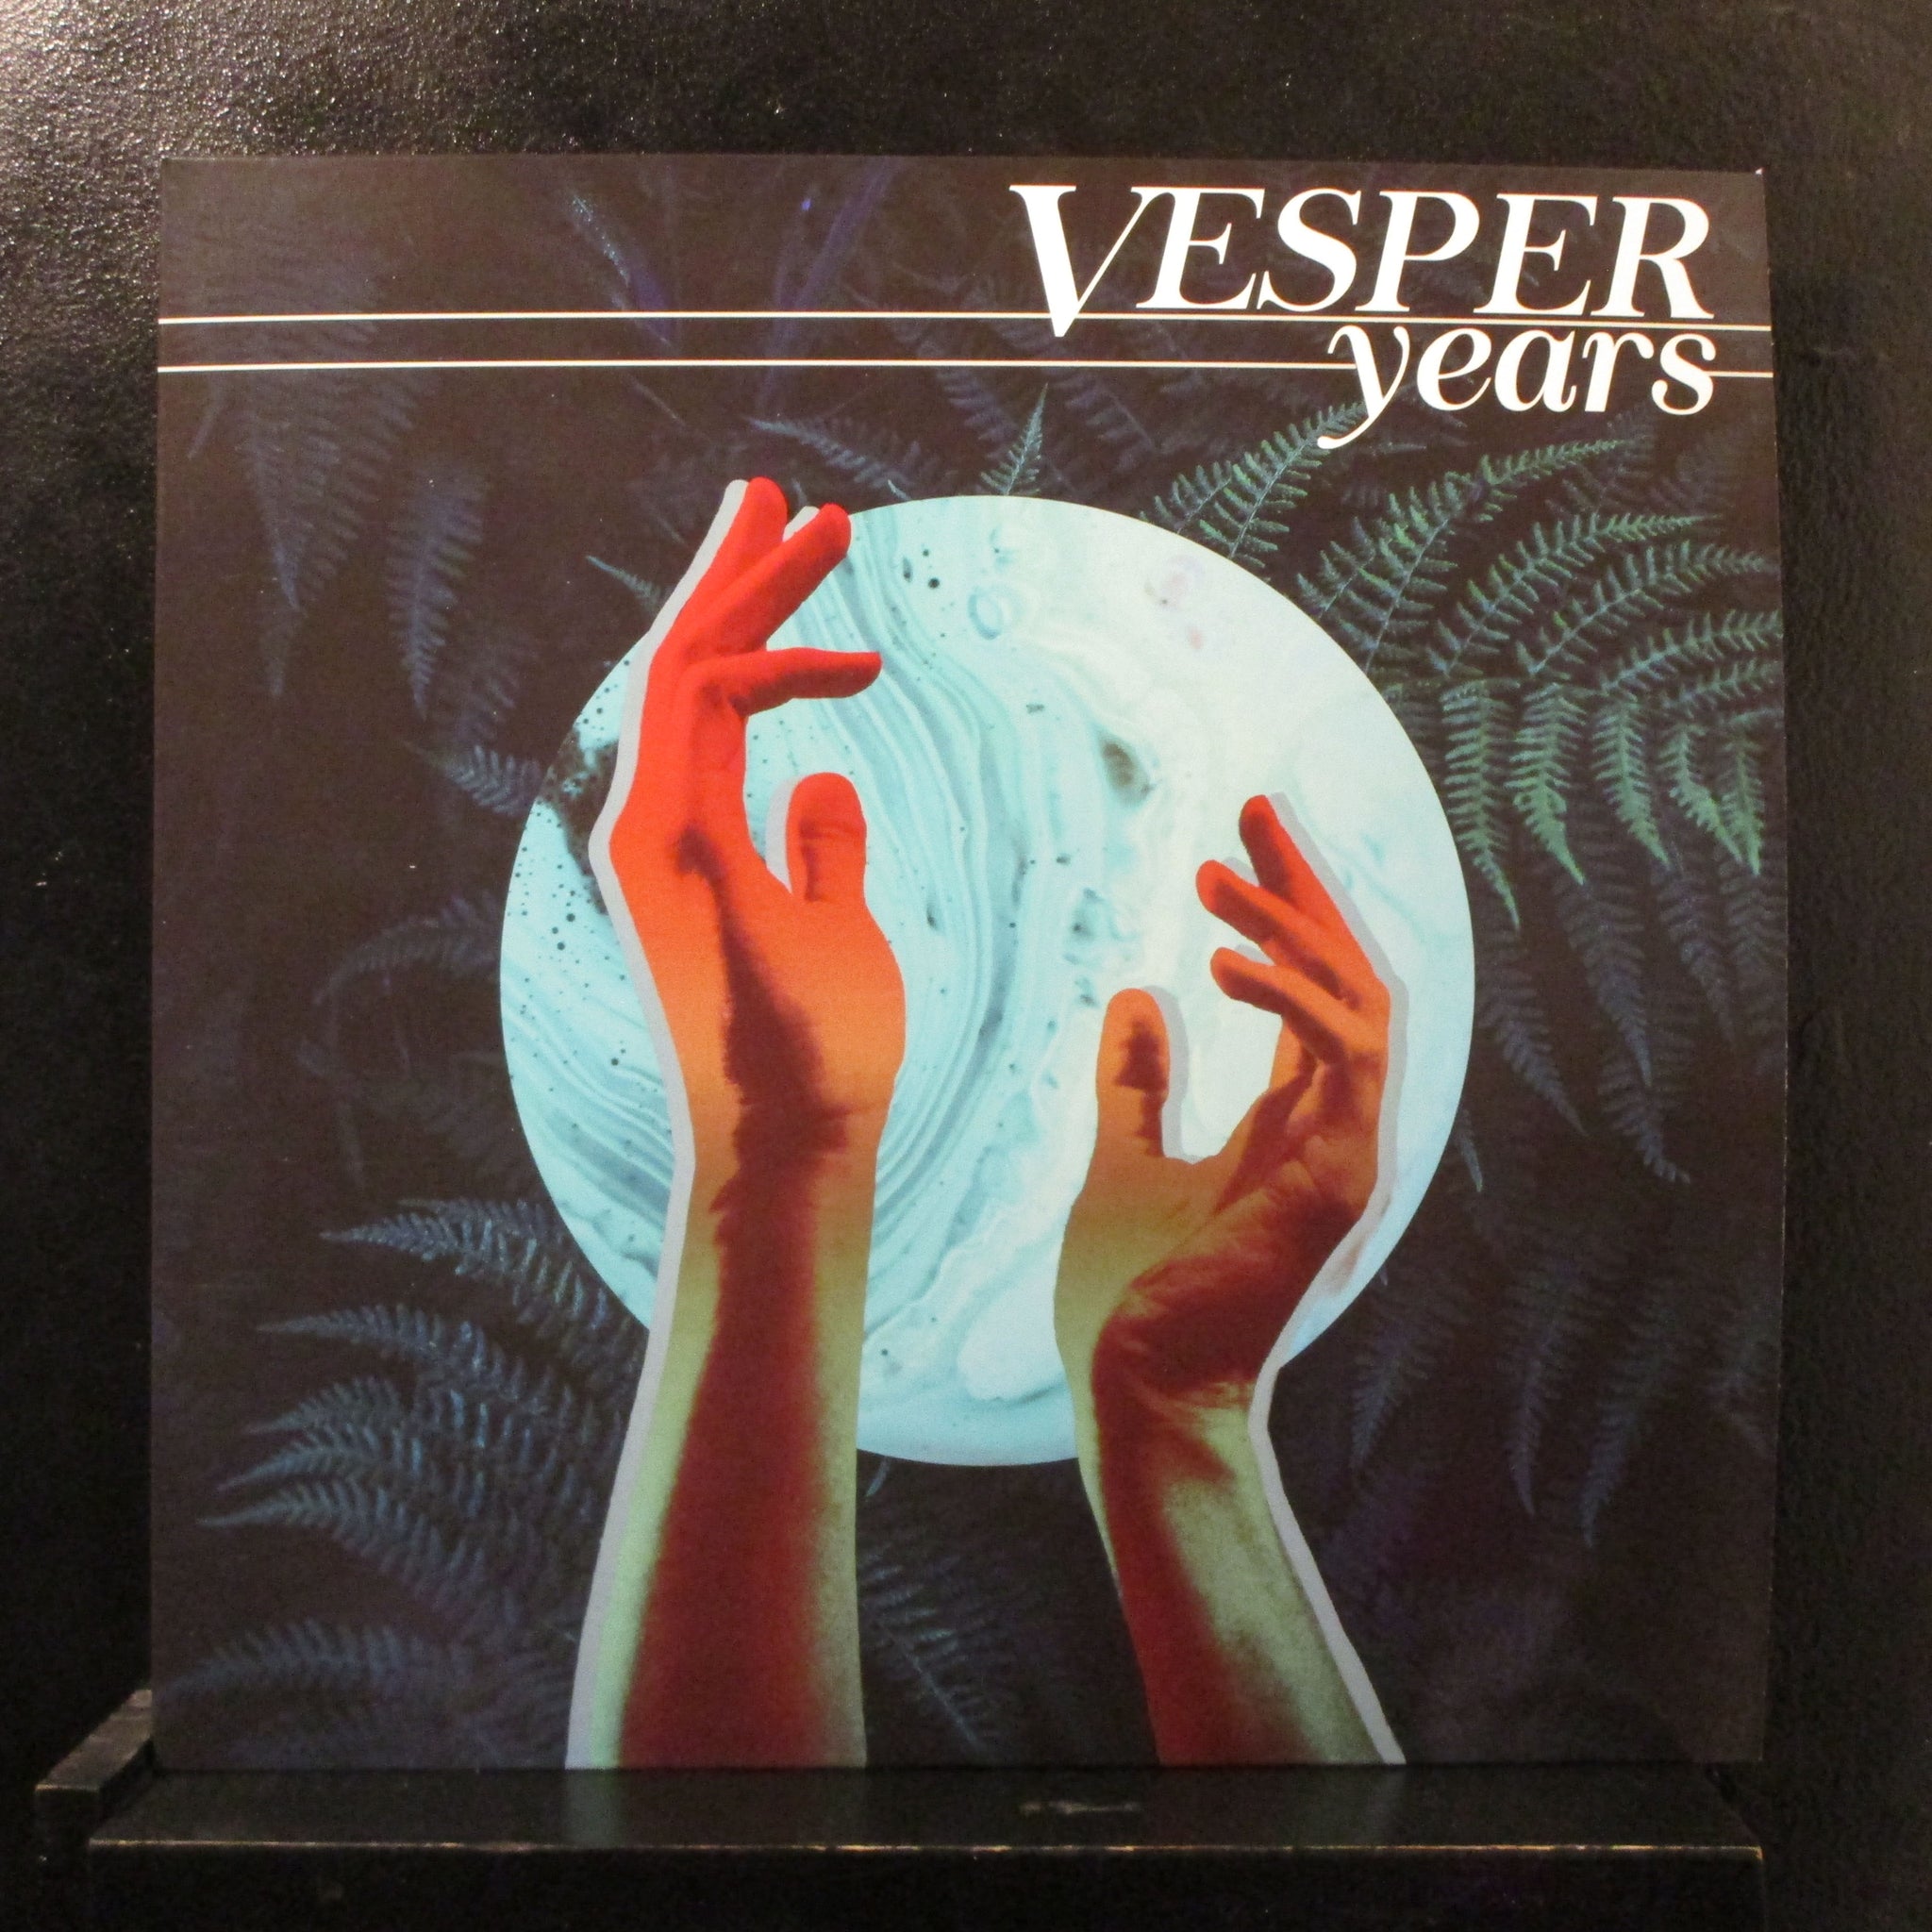 Vesper - Years - New LP Record 2019 Shuga Records Wax Mage Vinyl, Signed & Numbered (9/26) - Pop / Synth Pop